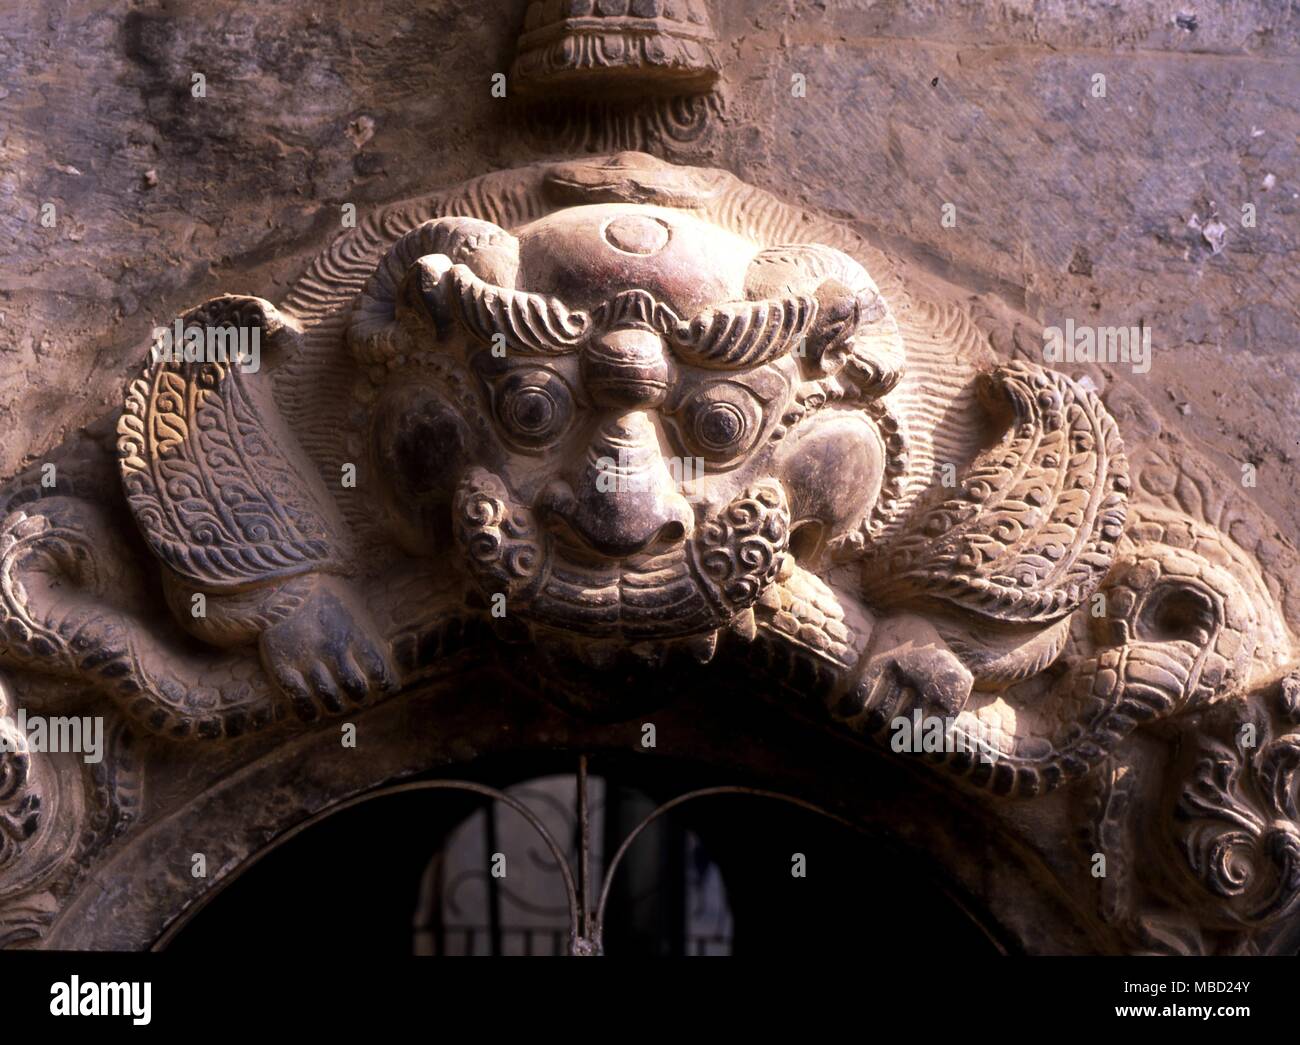 Tibetan Mythology. The head of Kirtimukha (Face of Glory) which is found above the portals of Shaivite temples, espcially in Kathmandu Stock Photo